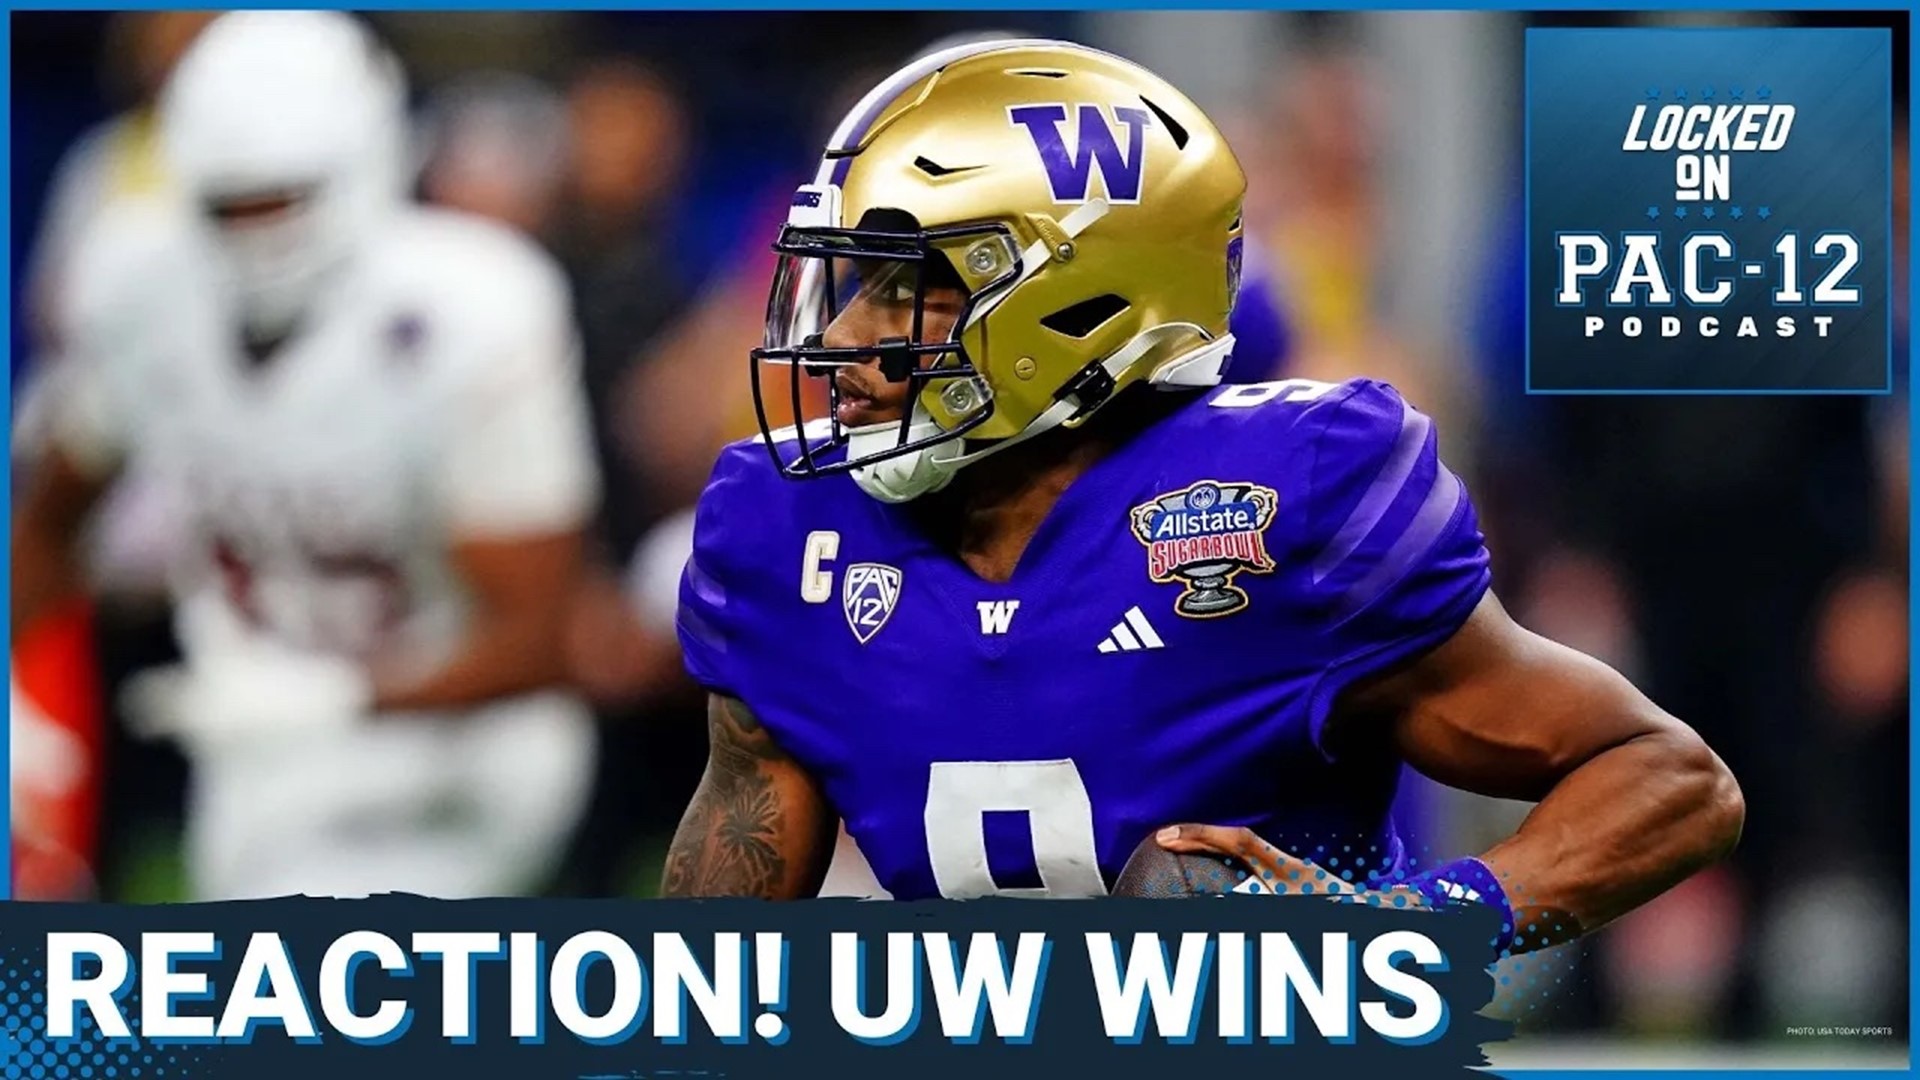 Washington had to travel much further than Texas to get to the Sugar Bowl in the CFP Semifinal, but they were the better team from the jump.